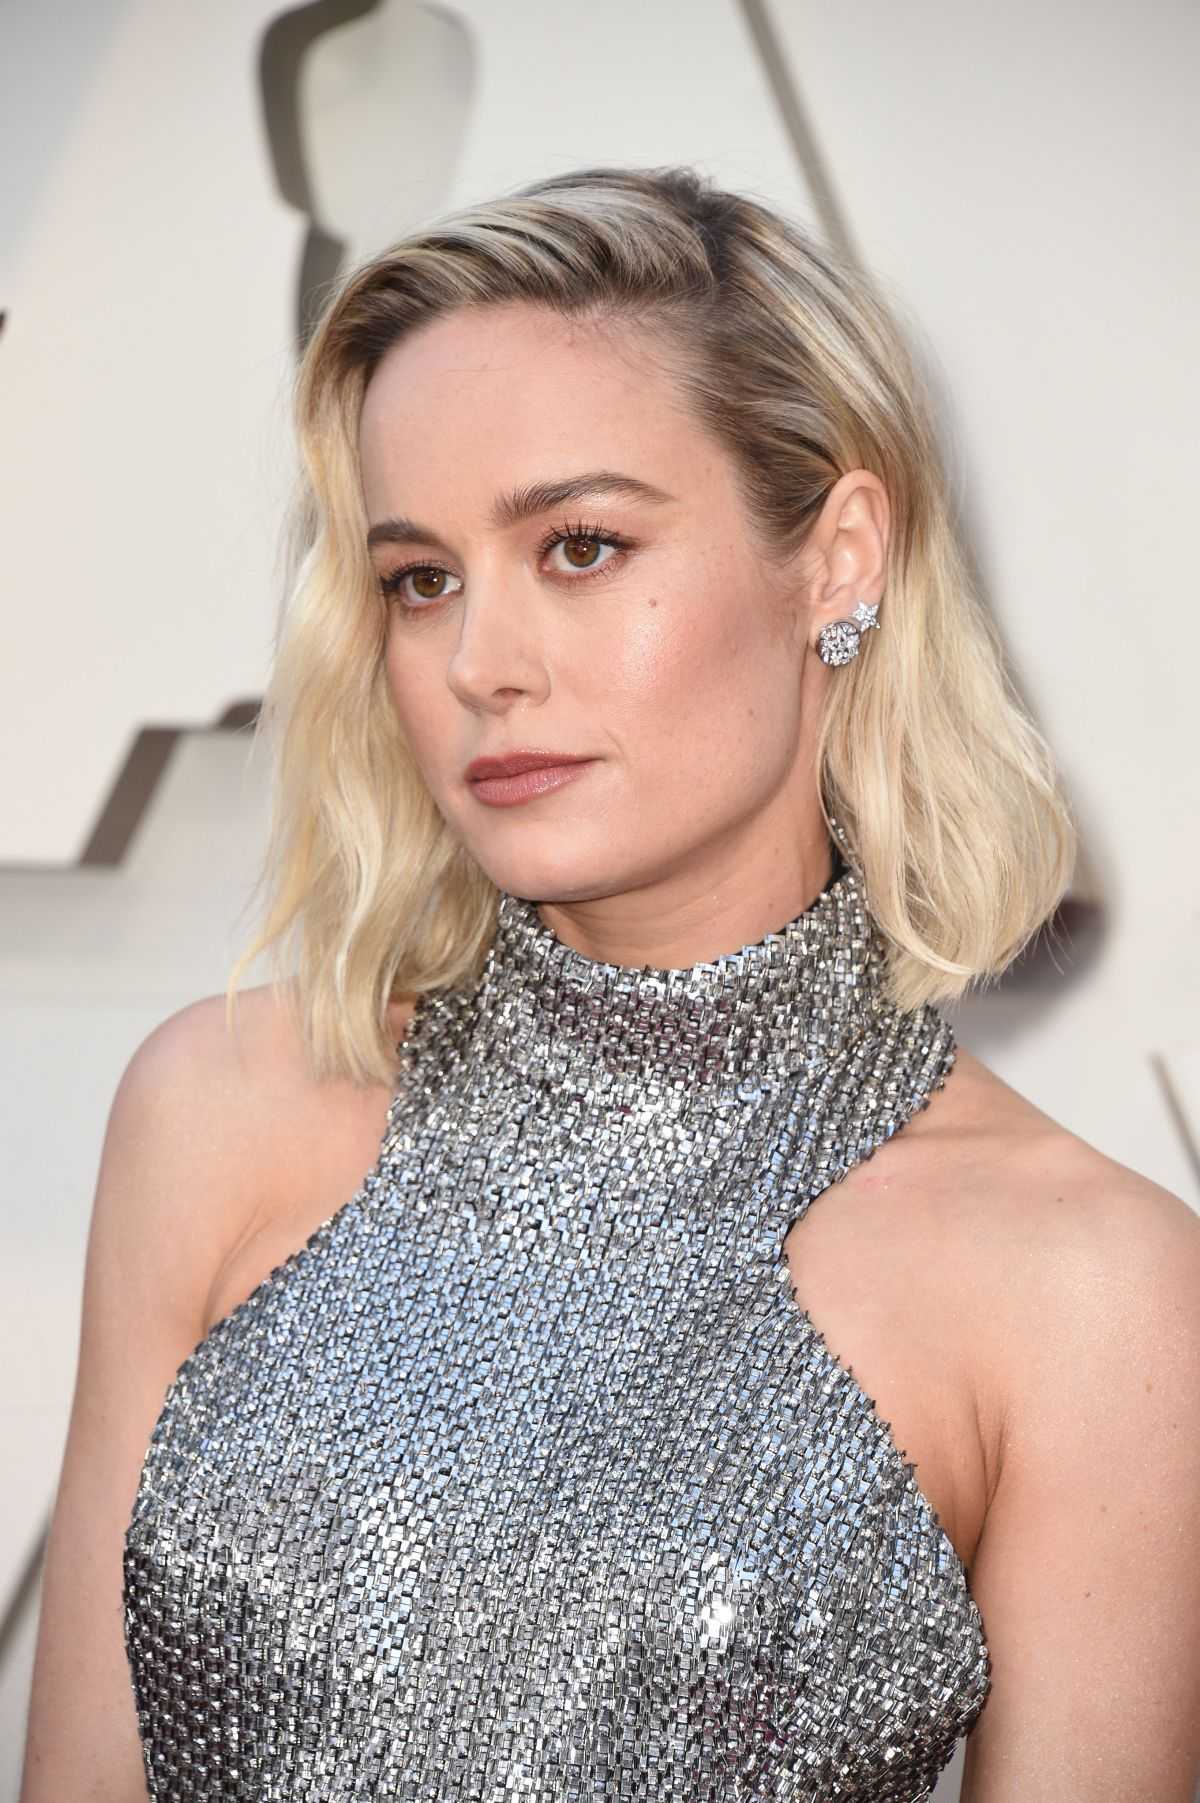 75+ Hot Pictures Of Brie Larson Who Will Be Captain Marvel In Marvel Cinematic Universe | Best Of Comic Books